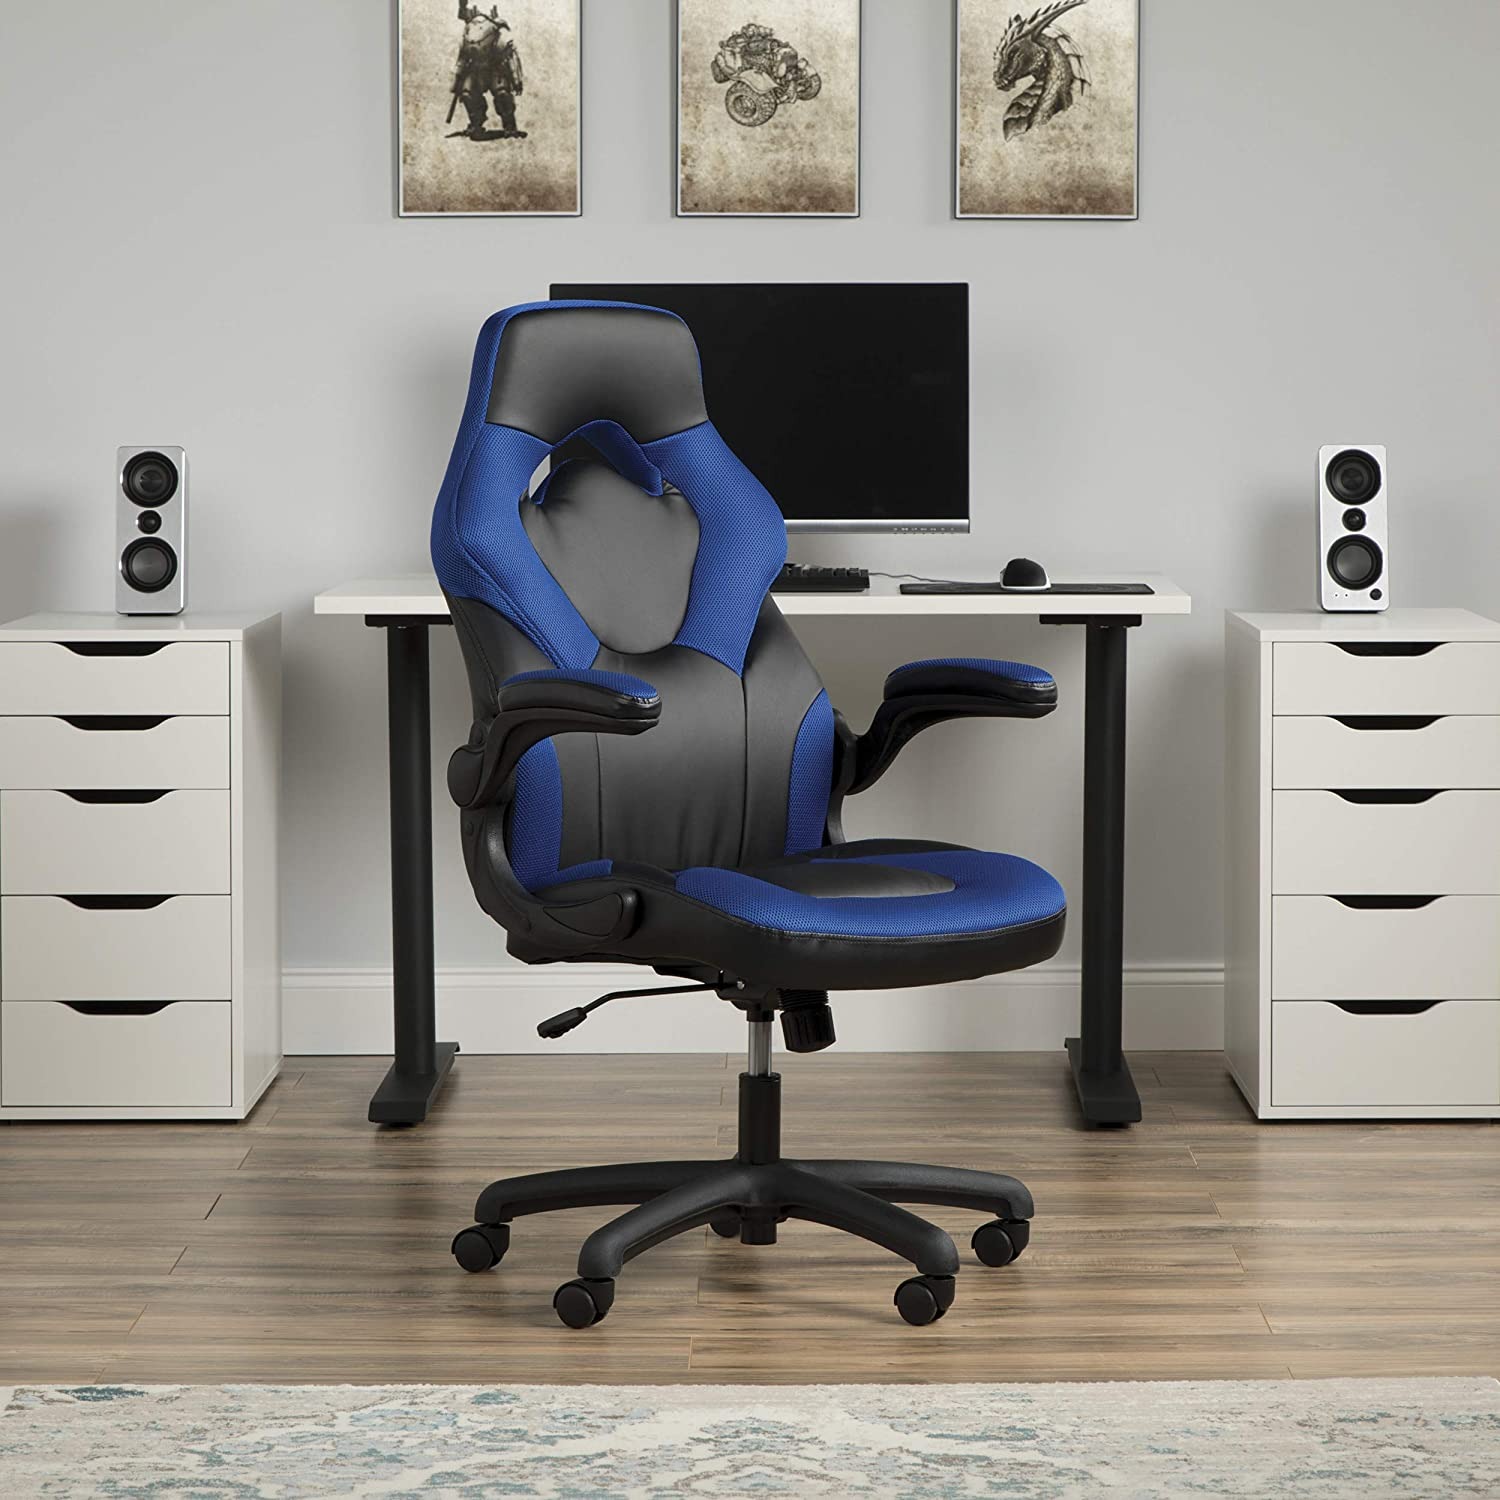 Top 5 Luxury Reclining Office Chair You Shouldn't Miss